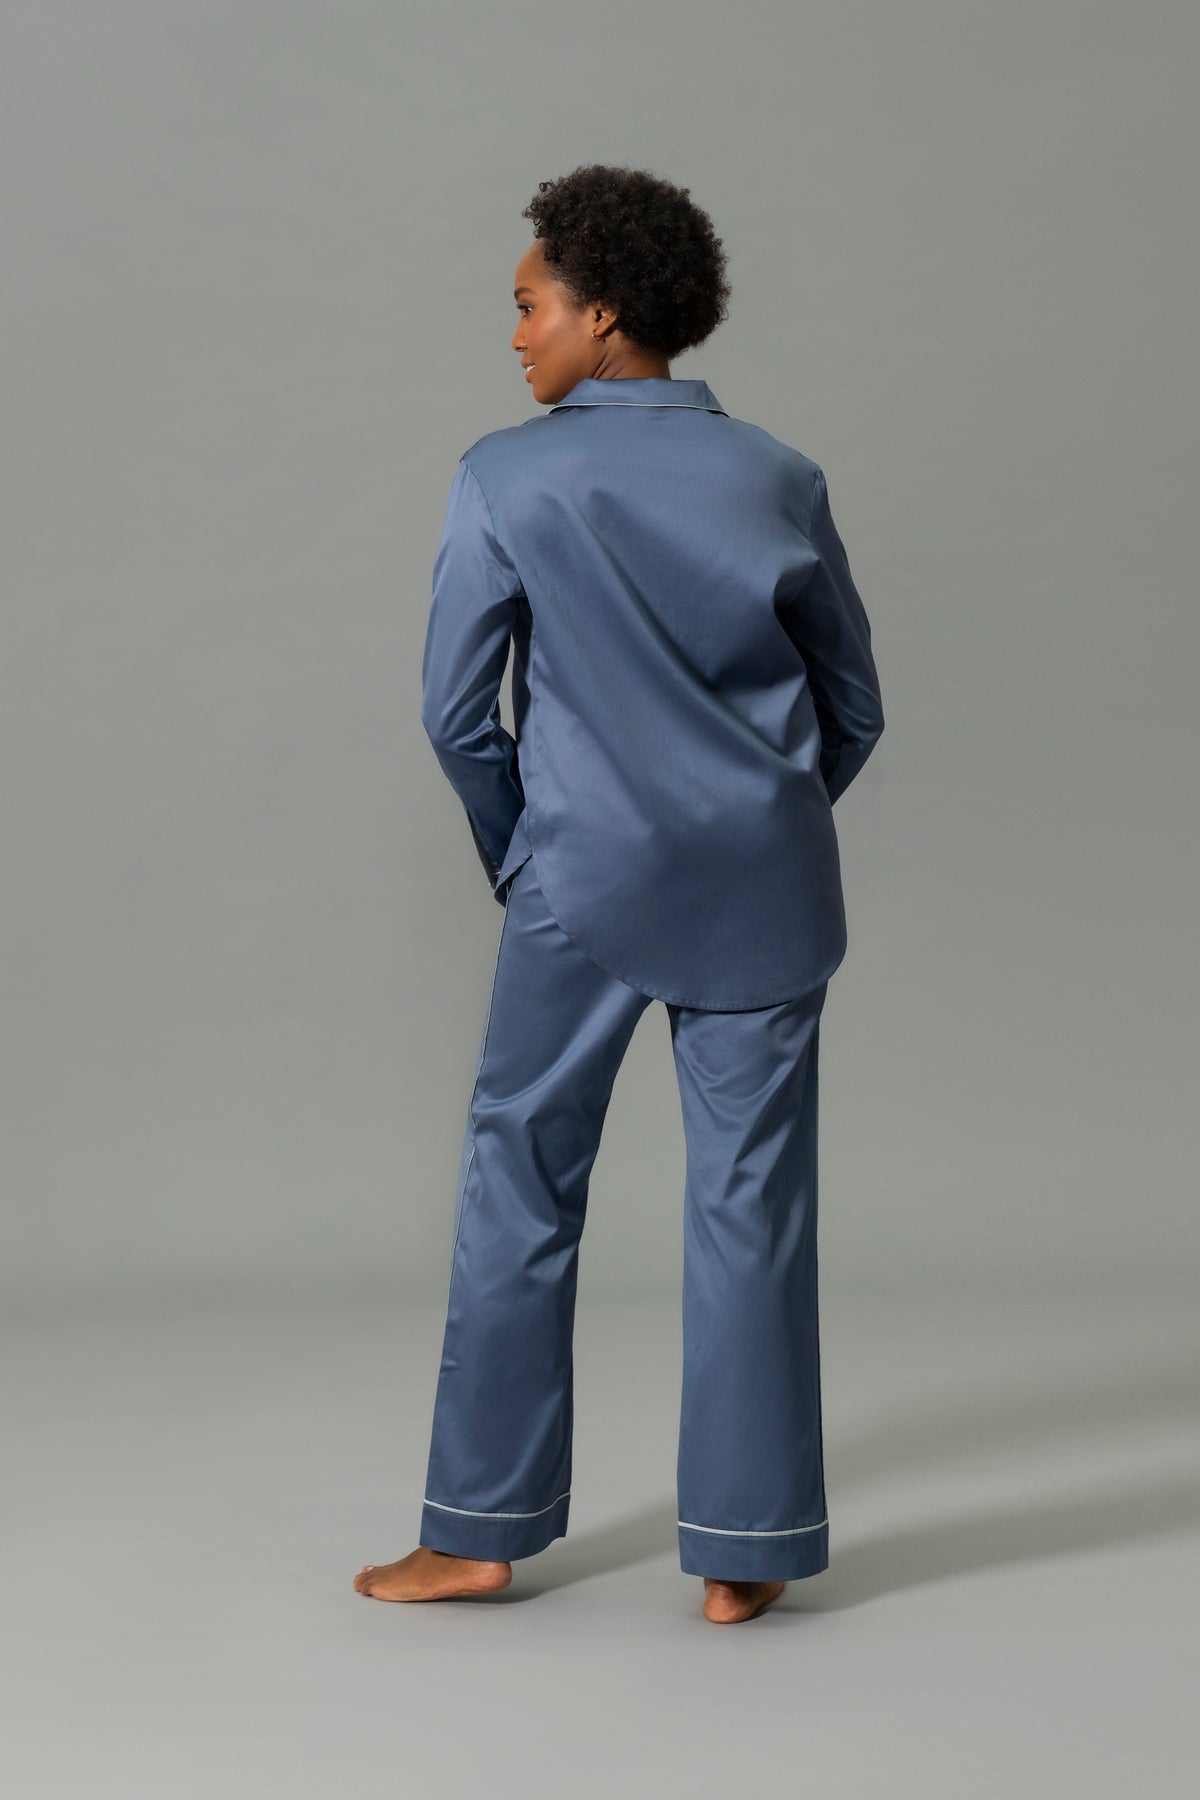 Back View of Model Wearing Matouk Nocturne Pajama Set in Color Steel Blue and Dove